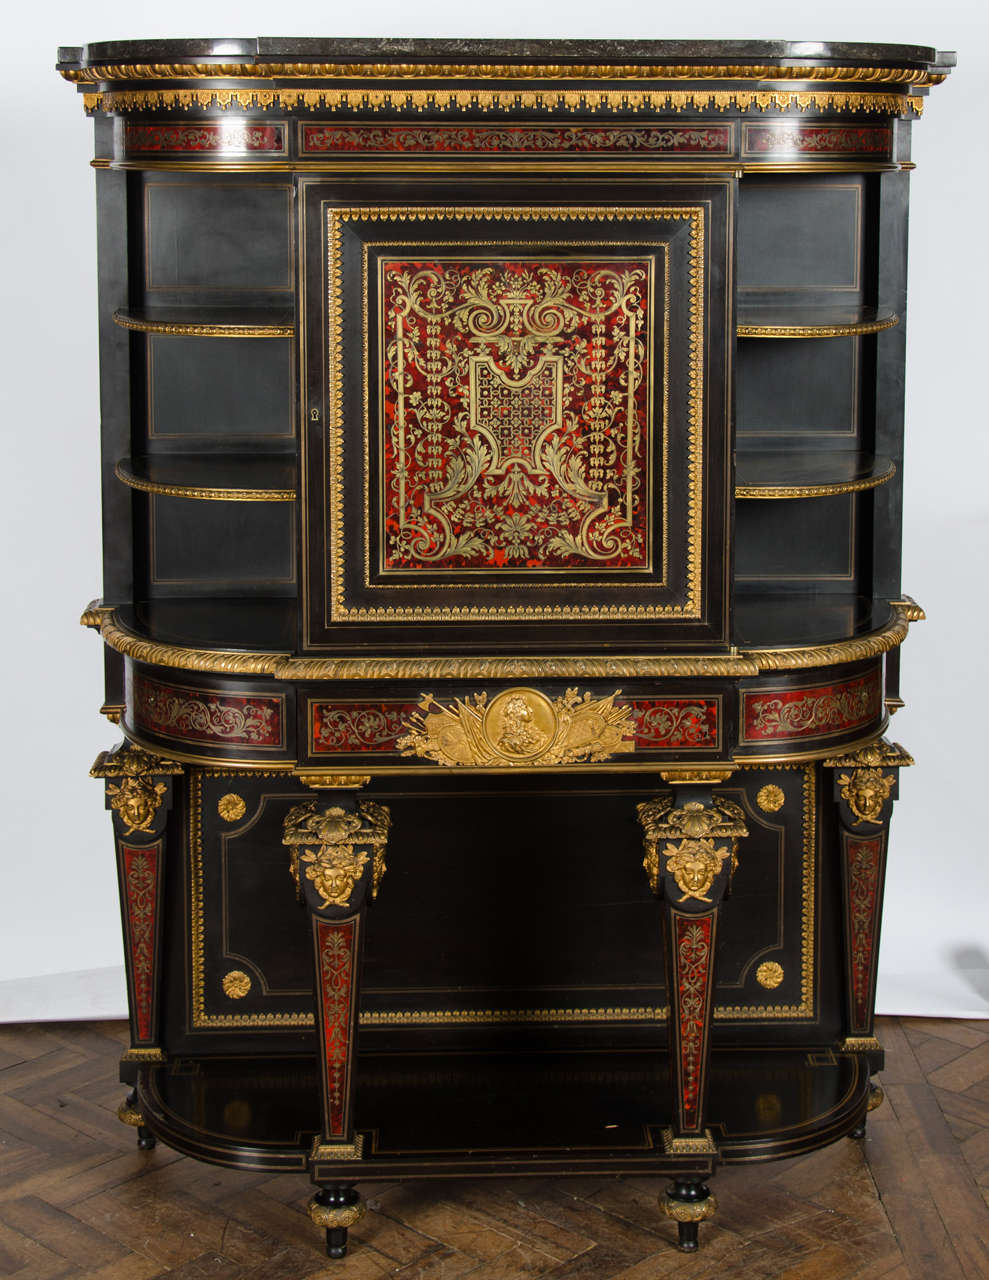 A fine quality French Louis XIV style Boulle inlaid bow fronted side cabinet, having a marble top, open shelves either side of the finely inlaid central door. A single frieze drawer with a gilded ormolu mount depicting the bust of Louis XIV. Raised